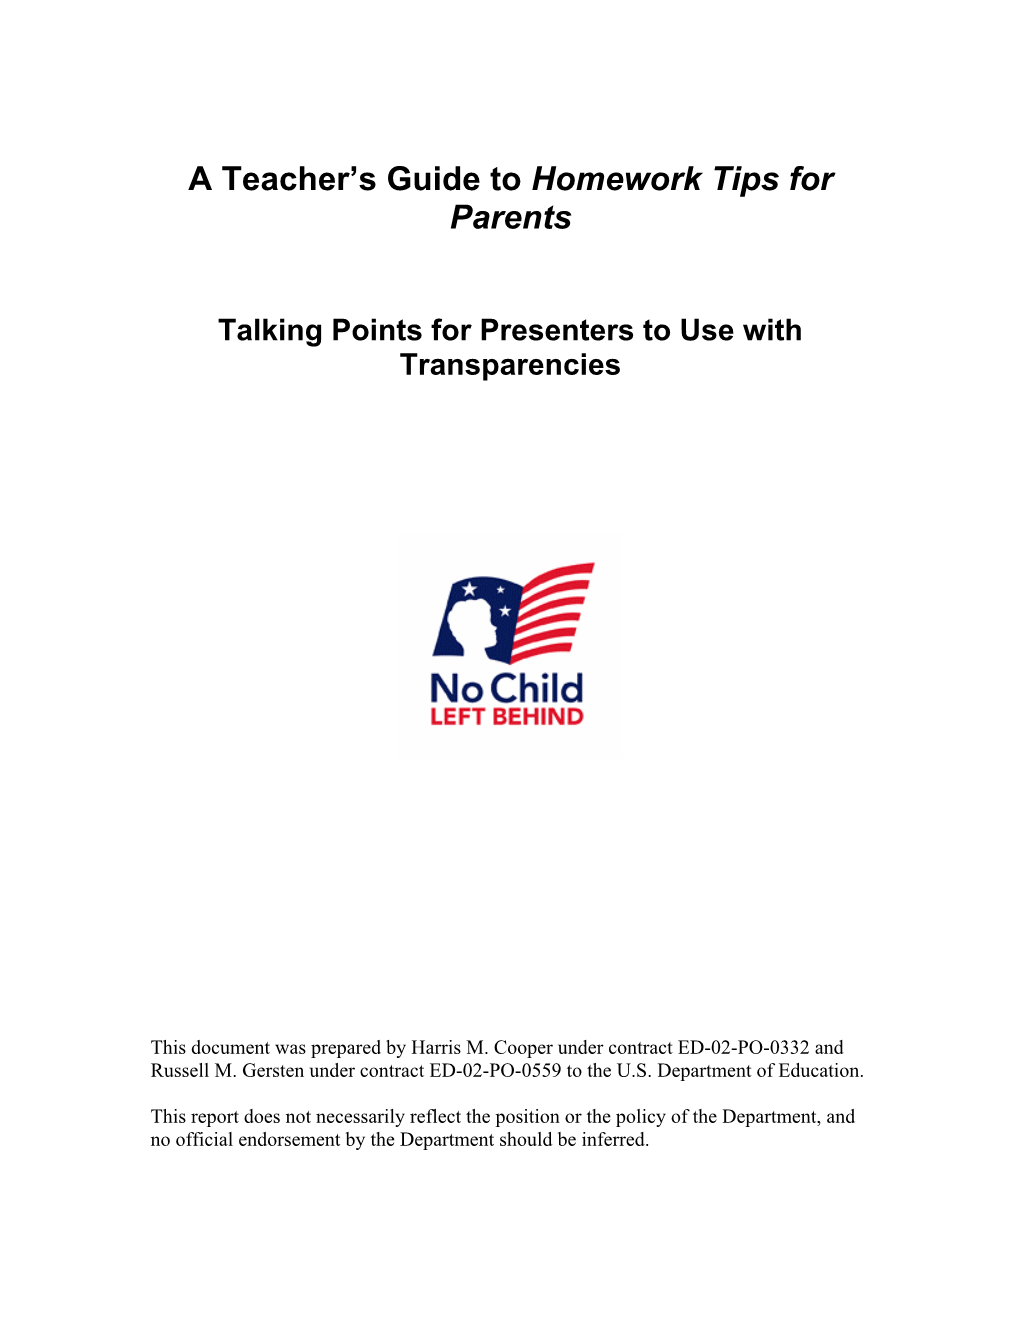 A Teacher's Guide to Homework Tips for Parents